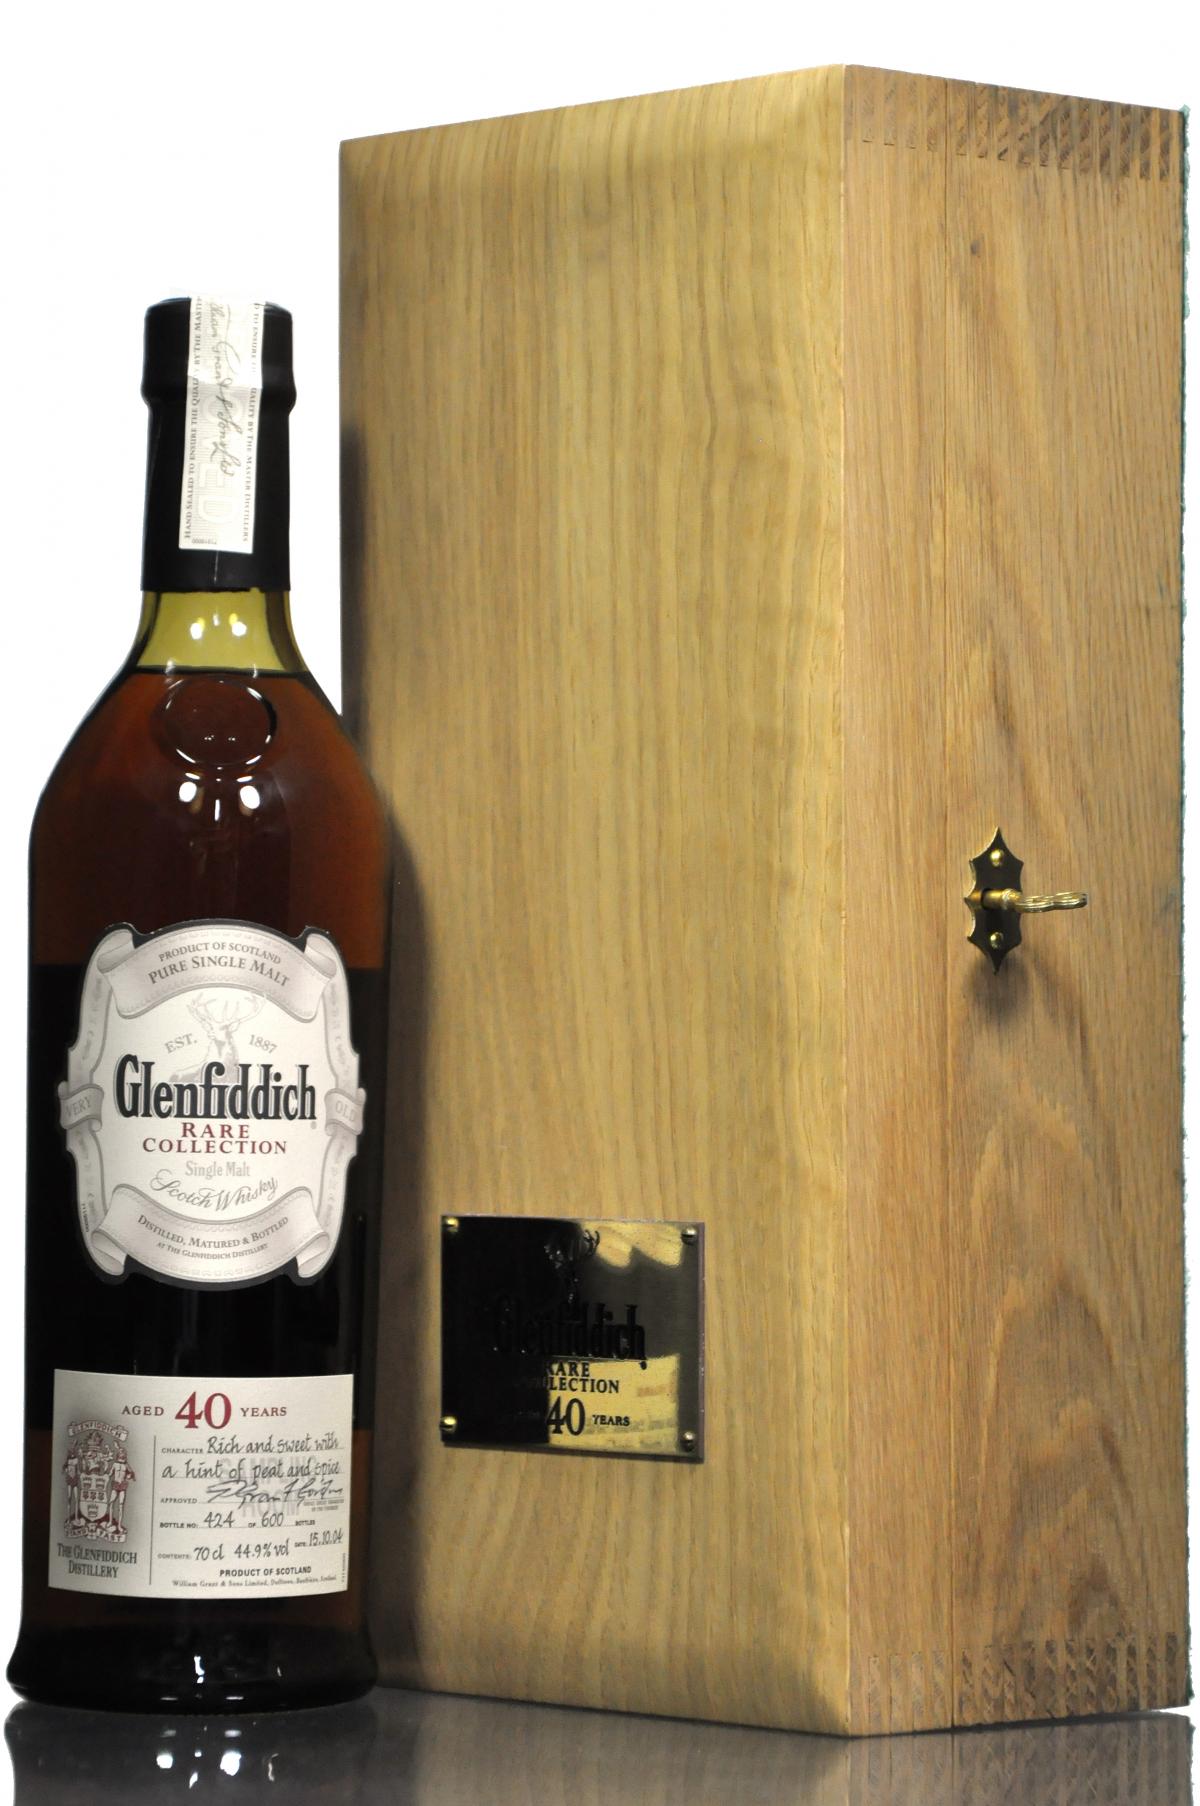 Glenfiddich 40 Year Old - Rare Collection Bottled 2004